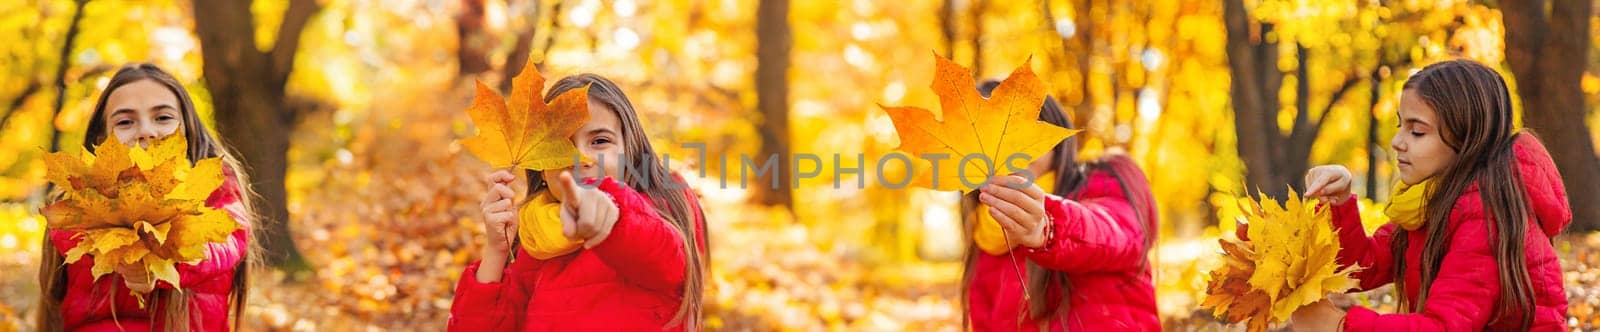 Autumn child in the park with yellow leaves. Selective focus. by yanadjana